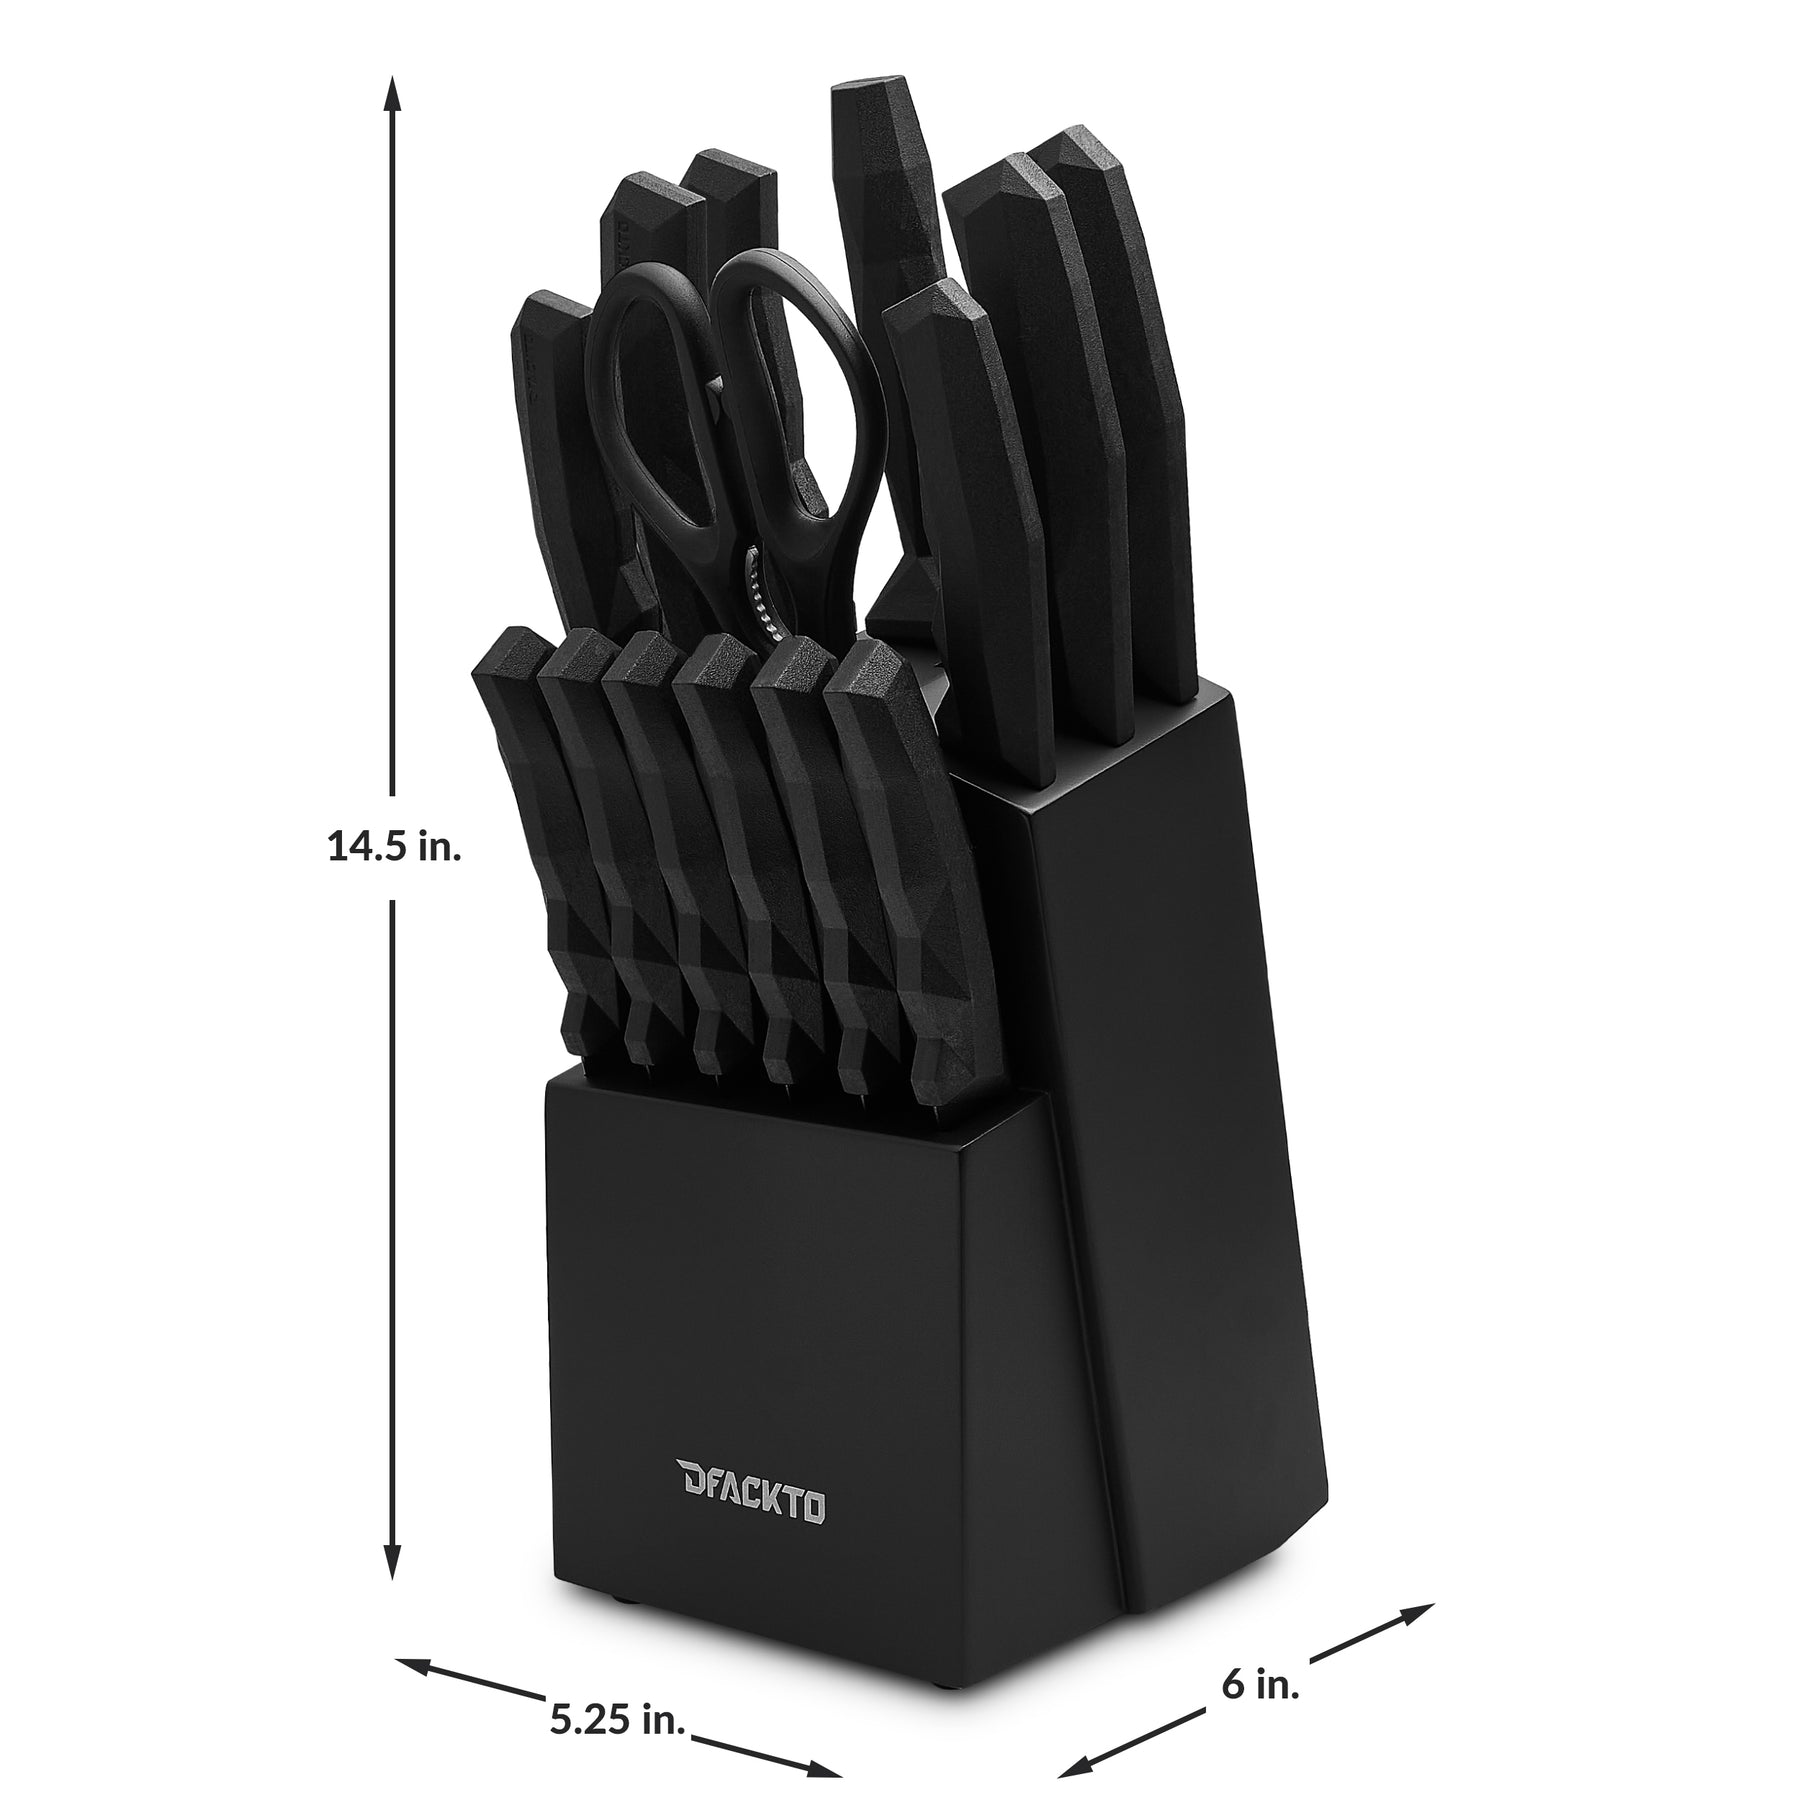 Wölfe 14 Pc Cutlery Set with Magnetic Block – Tahoe Kitchen Co